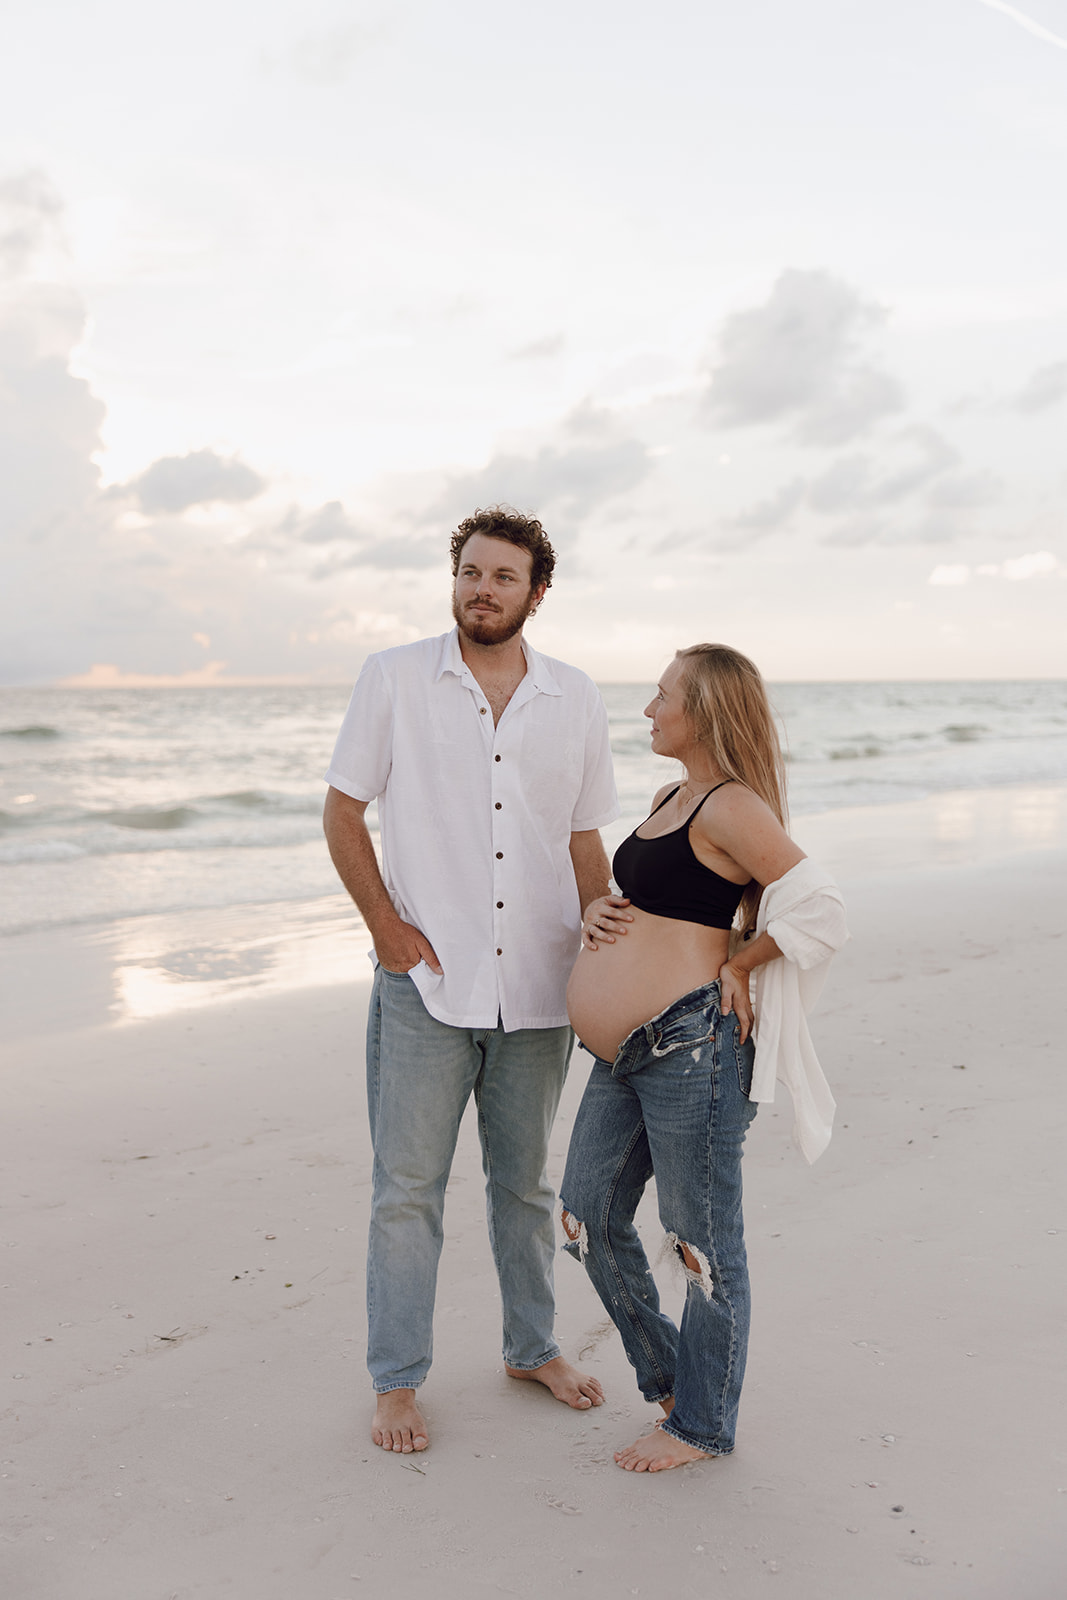 the couple standing together on the beach for their couple photo maternity session